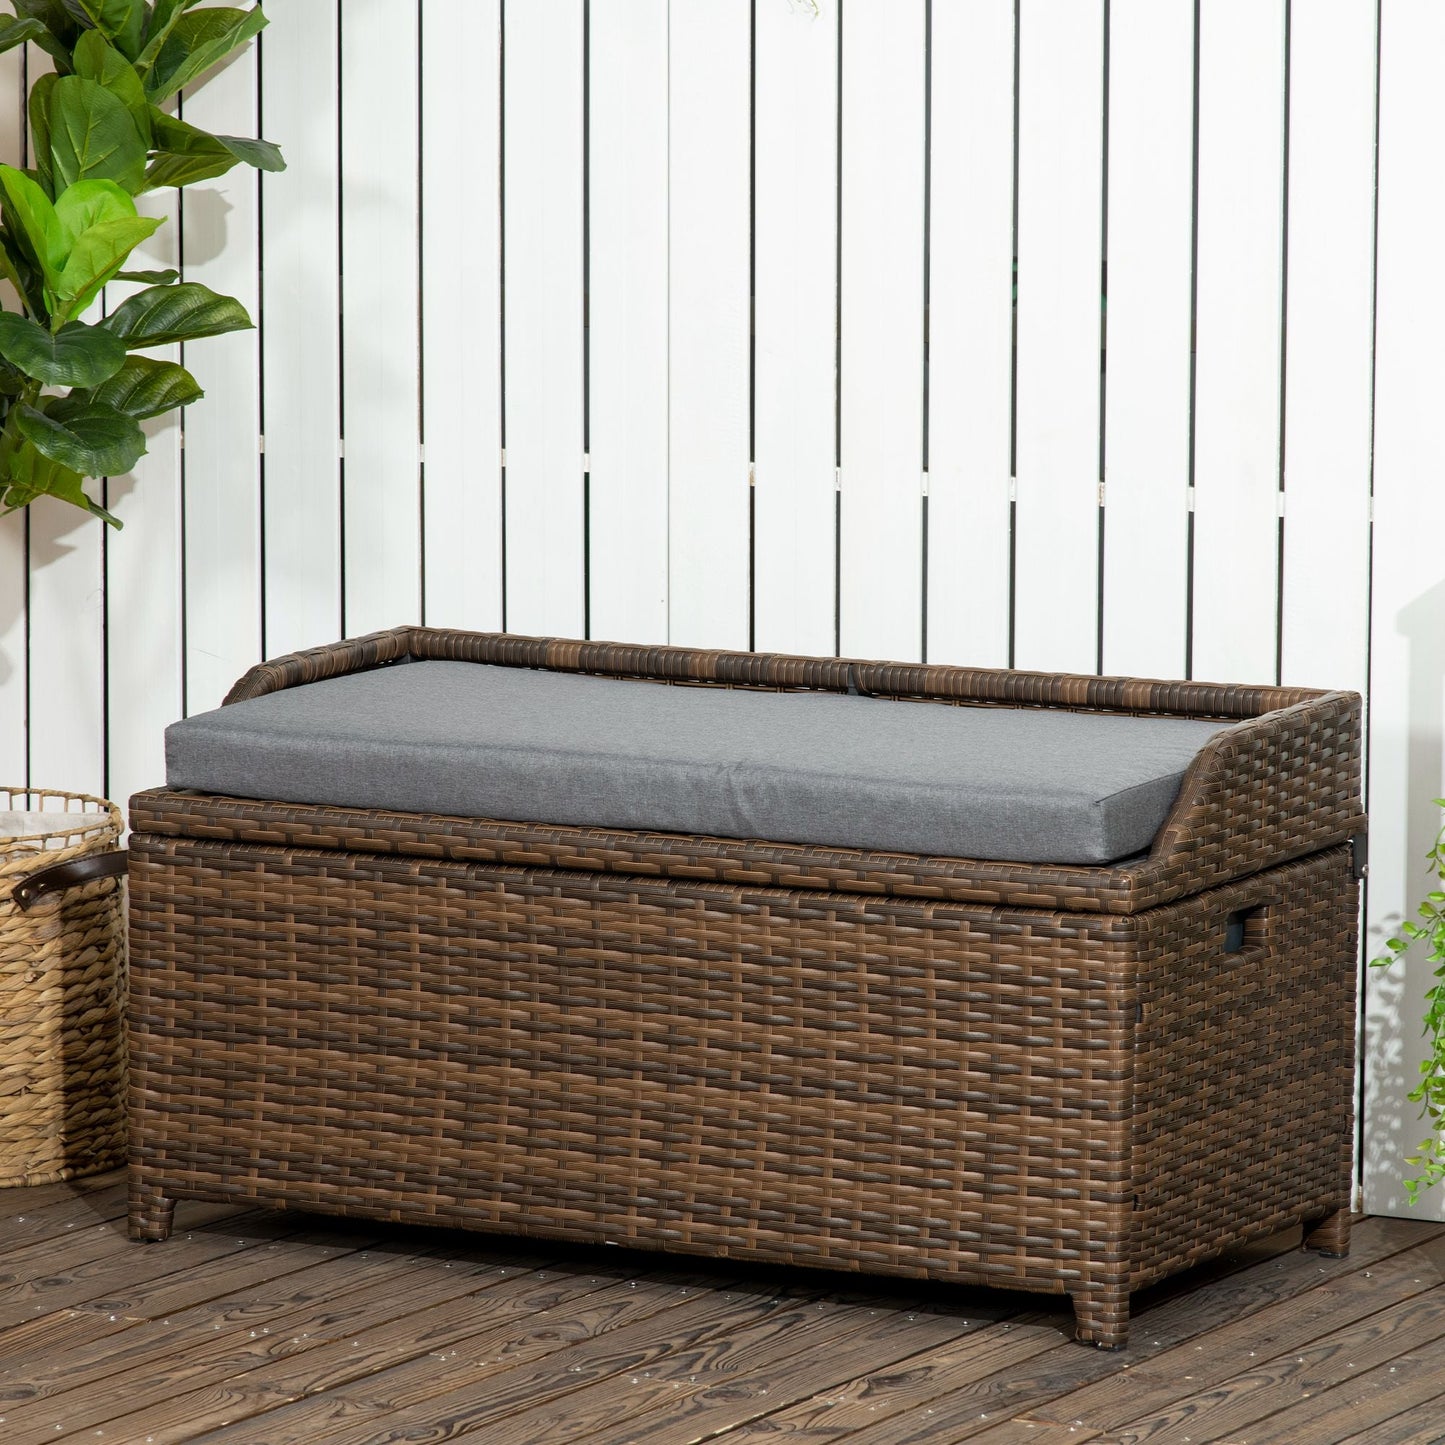 Outdoor and Garden-Patio Wicker Storage Bench, Cushioned Outdoor PE Rattan Patio Furniture, Air Strut Assisted Easy Open,2-In-1 Seat Box with Handles Seat - Outdoor Style Company